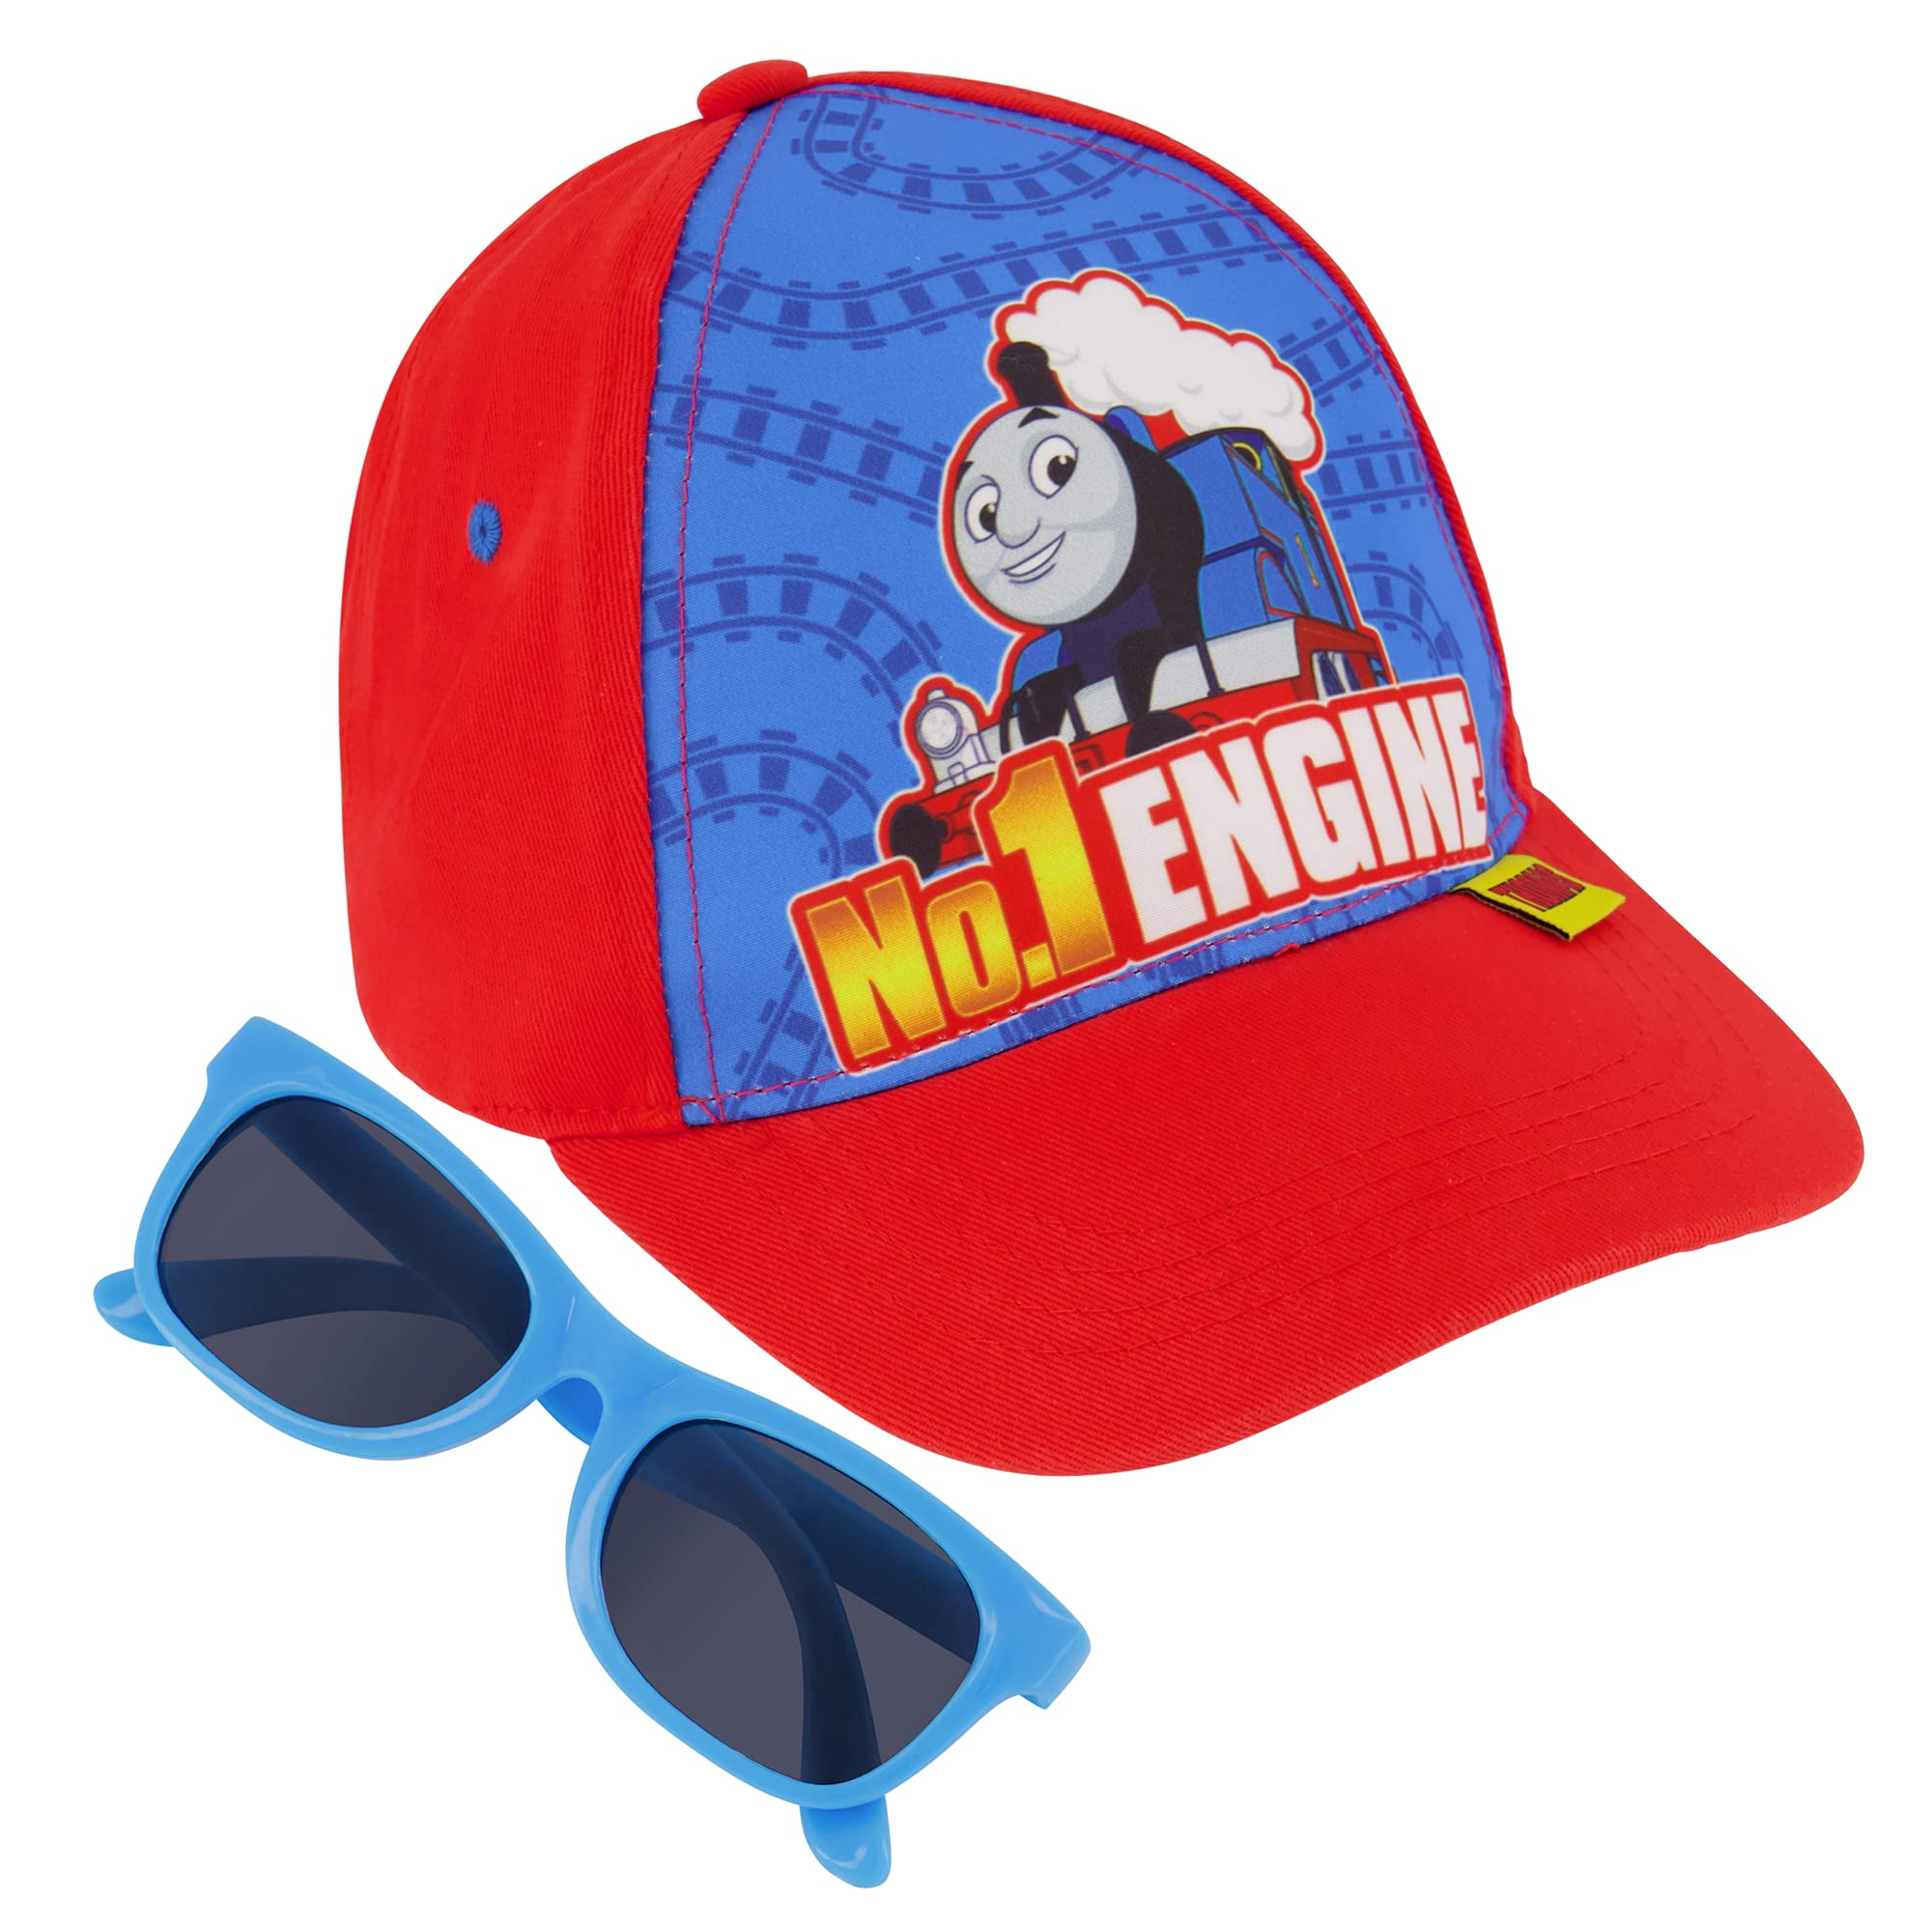 ABG Toddler Hat for Boys Ages 2-4, Kids Baseball Cap and Sunglasses